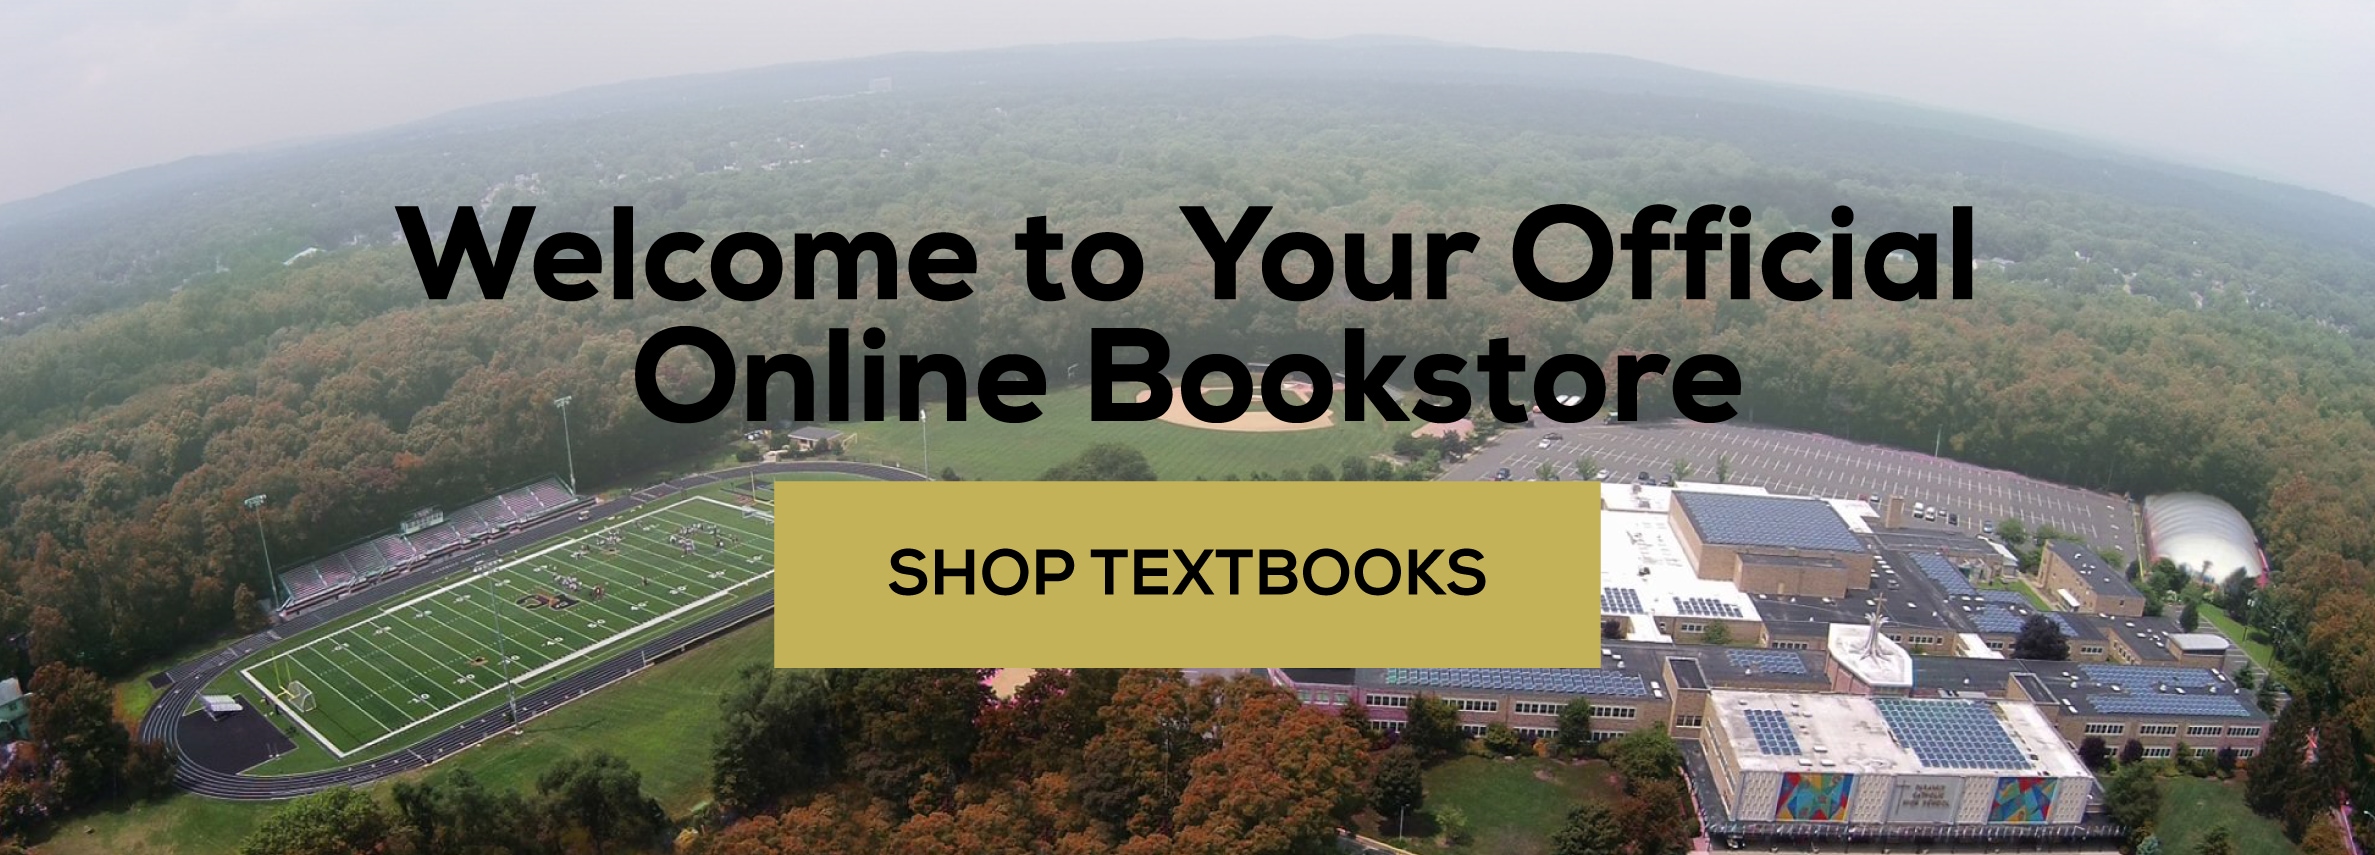 Welcome to your official online bookstore shp textbooks